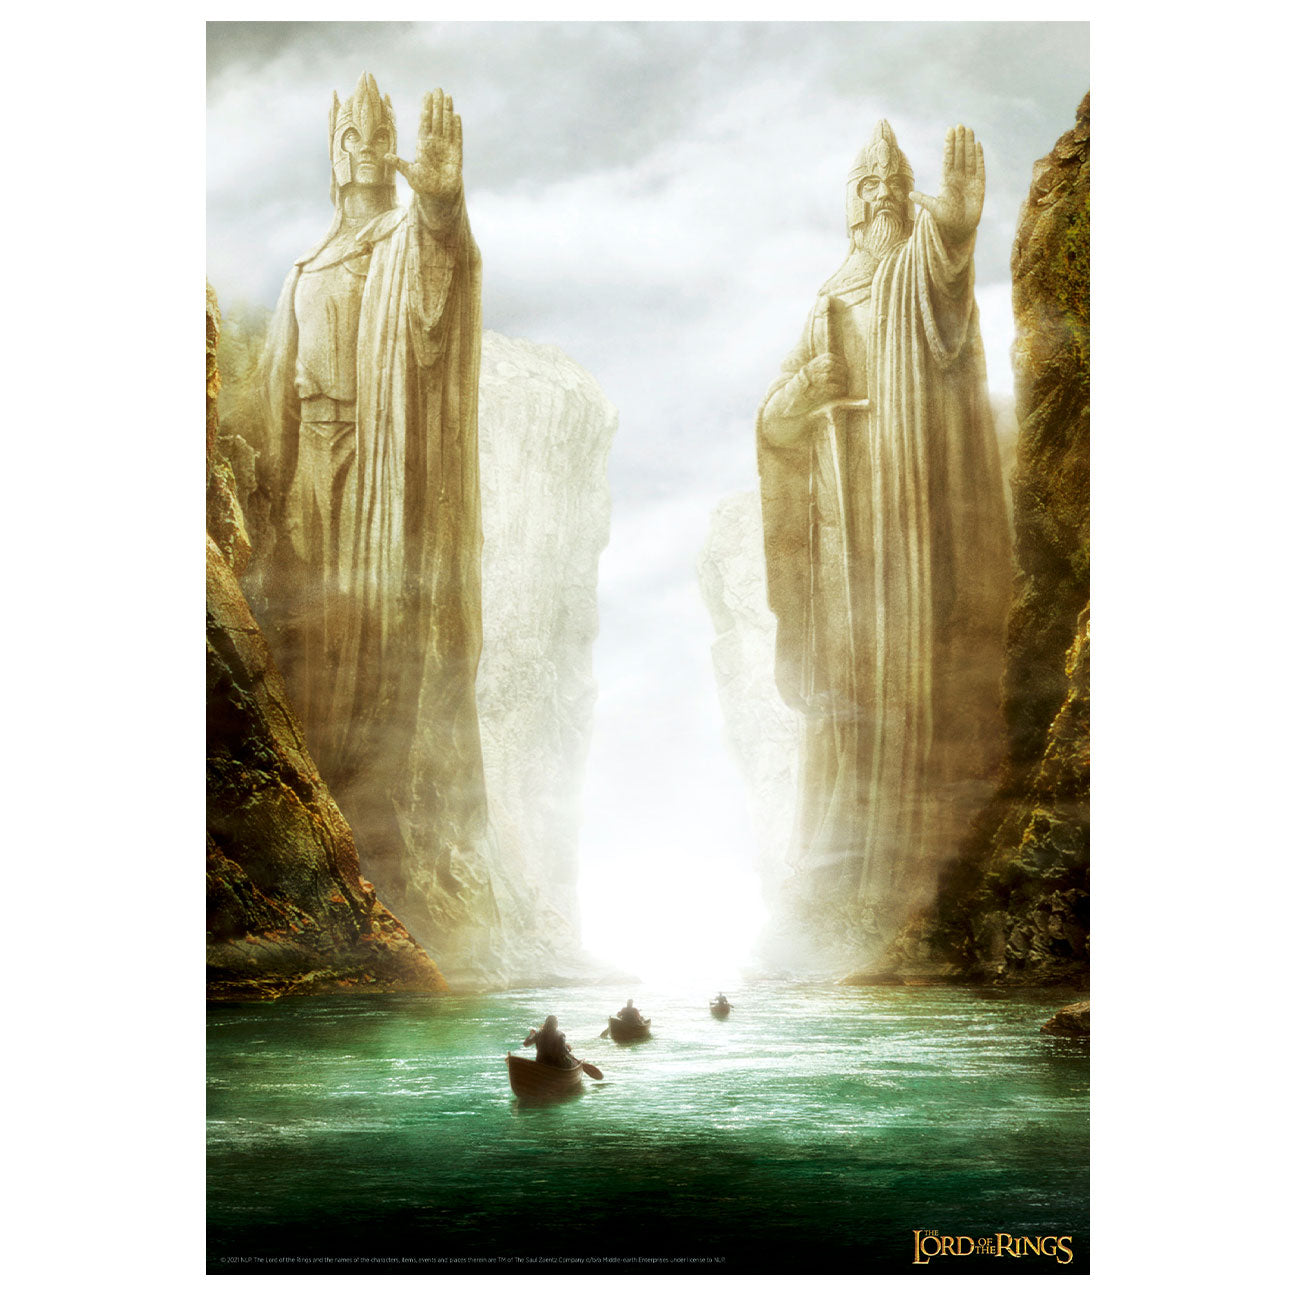 The Lord of the Rings Limited Edition Art Print